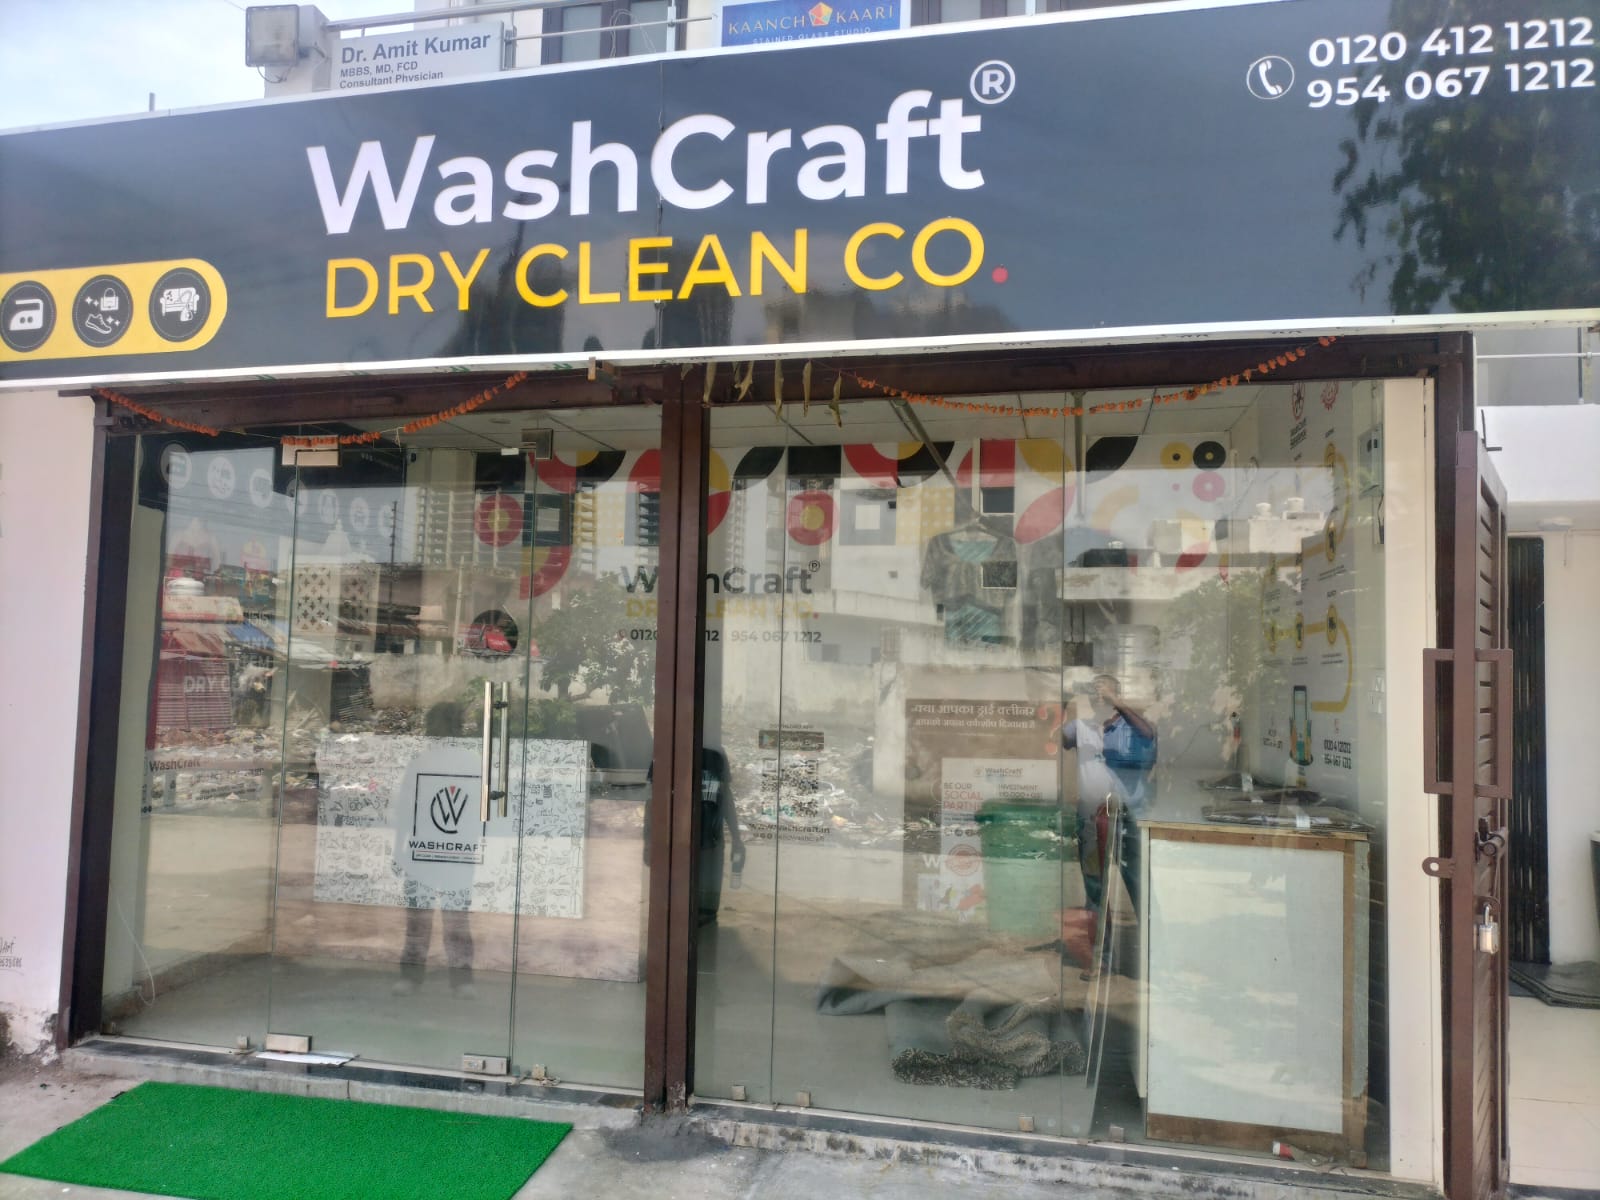 WashCraft Dry Cleaning Co